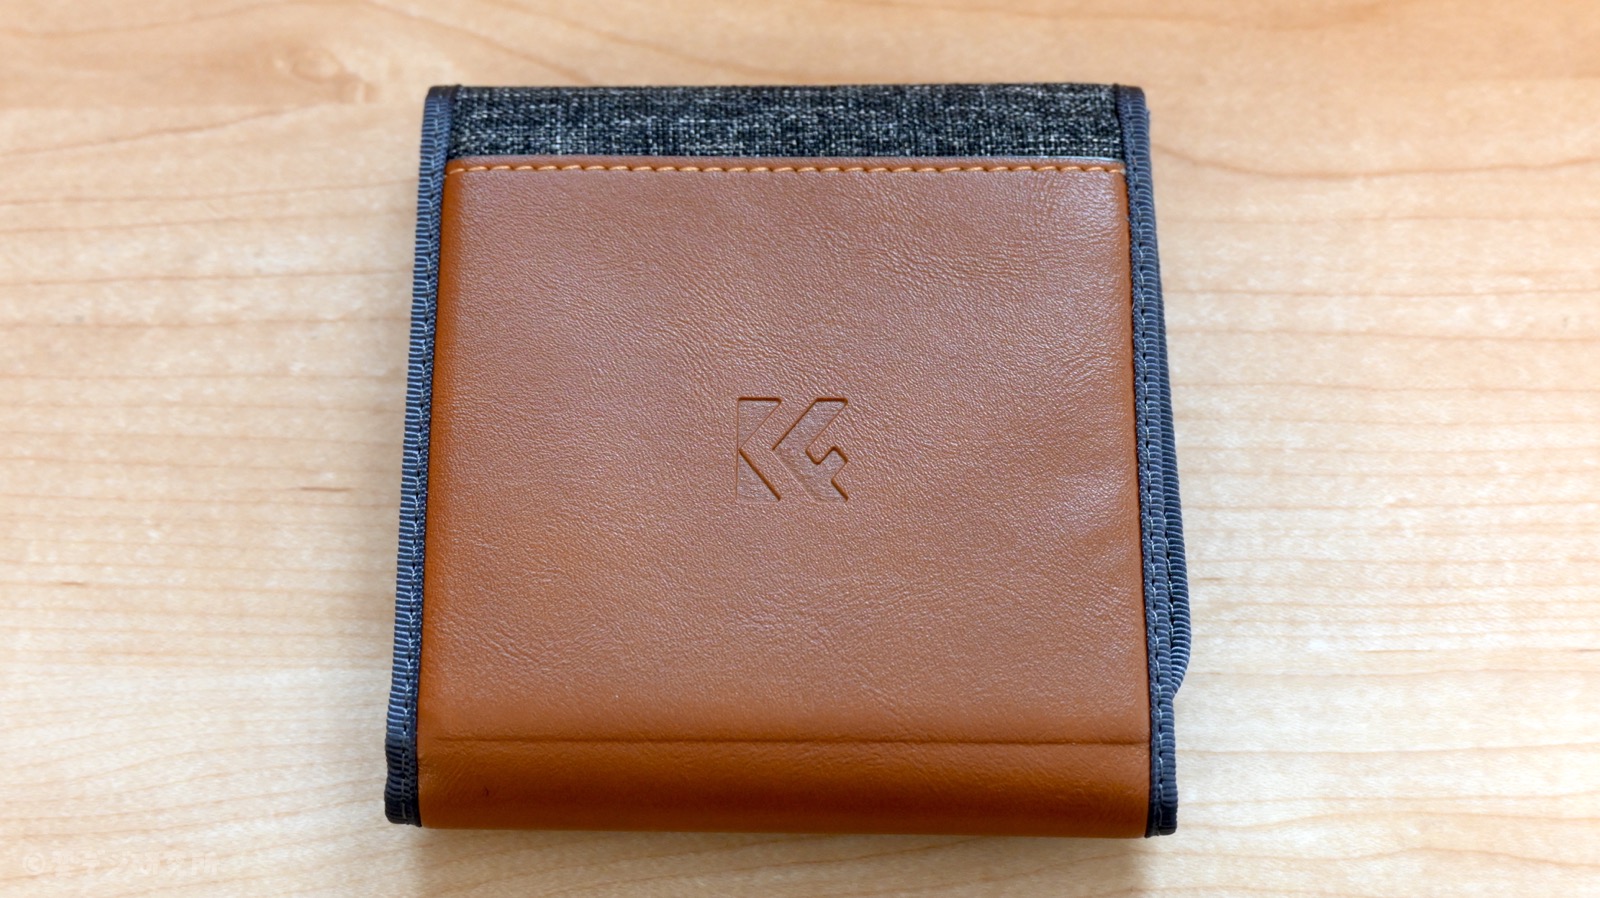 K and Concept フィルターケース